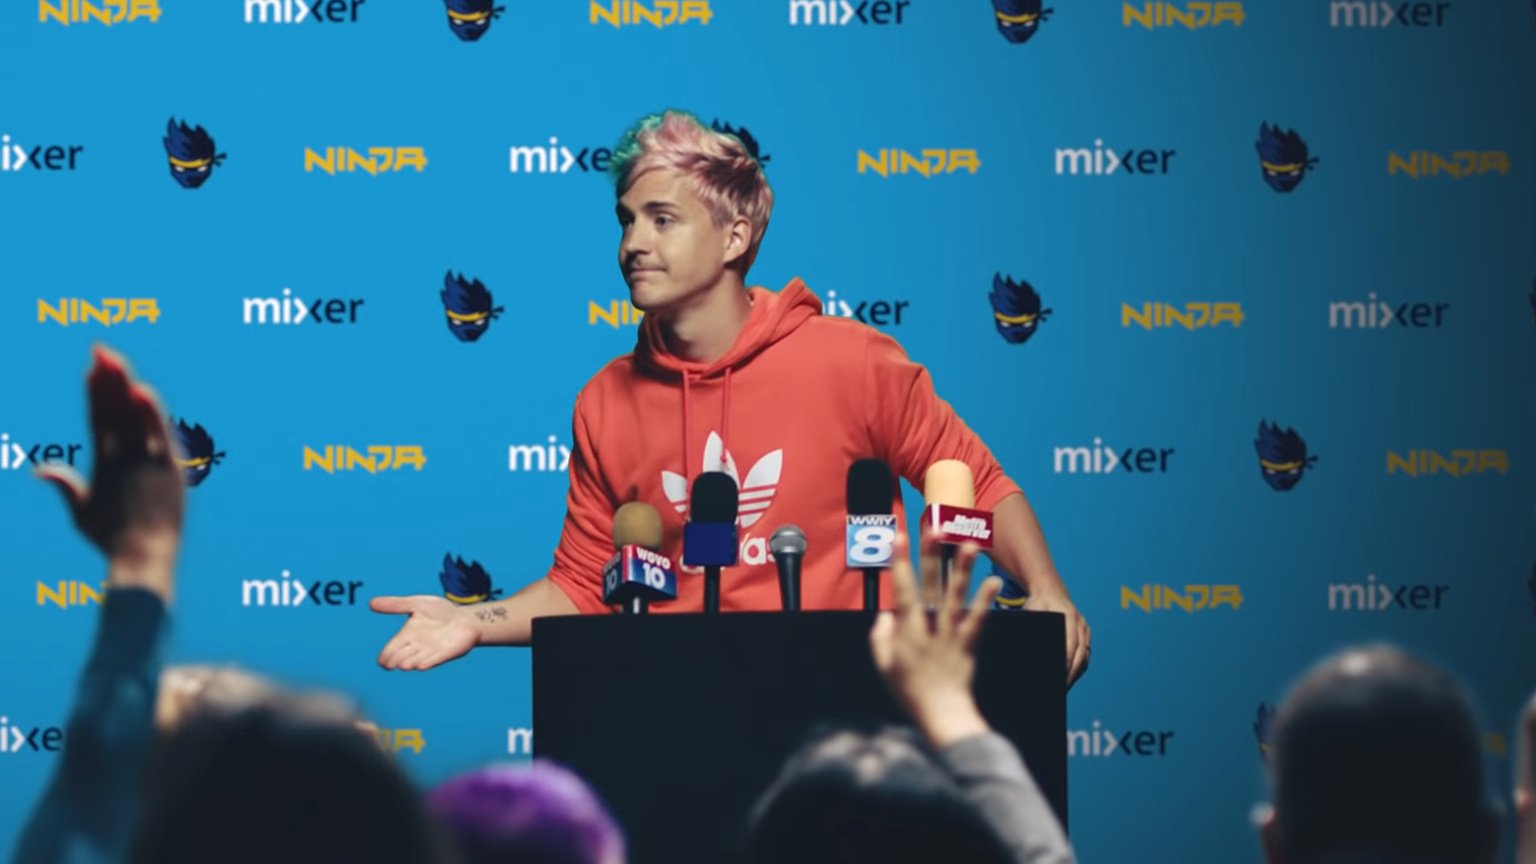 Ninja Thinks Pro Players And Streamers Who Cheat Should Be Treated